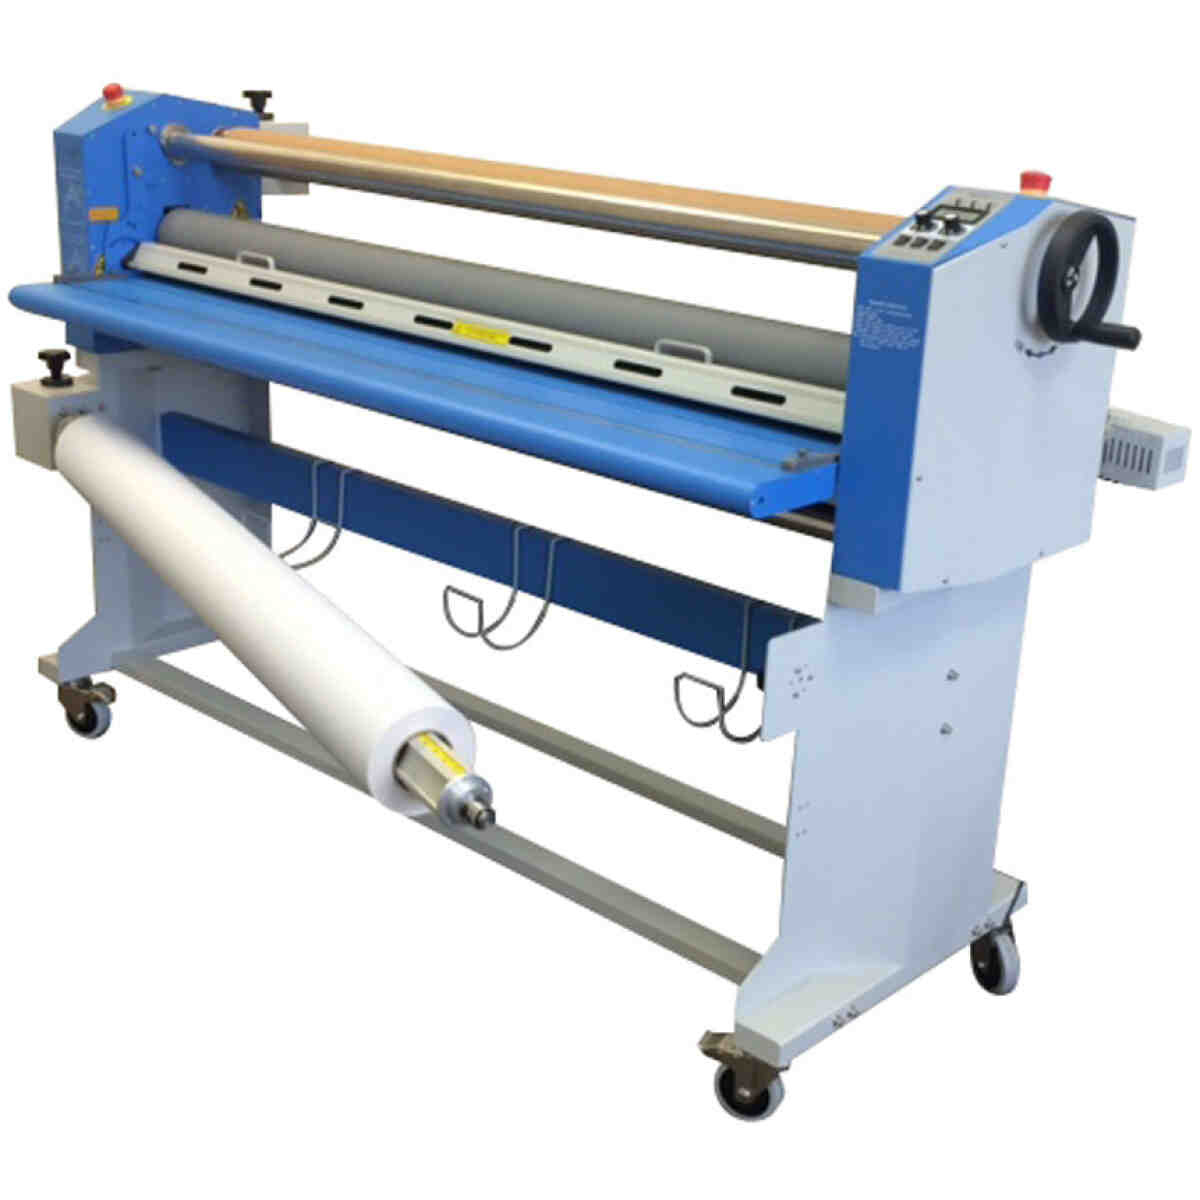 GFP Top Heat Laminator 563Th-4Rs 63" With Swing Out Shafts GRAPHIC FINISHING PARTNERS®